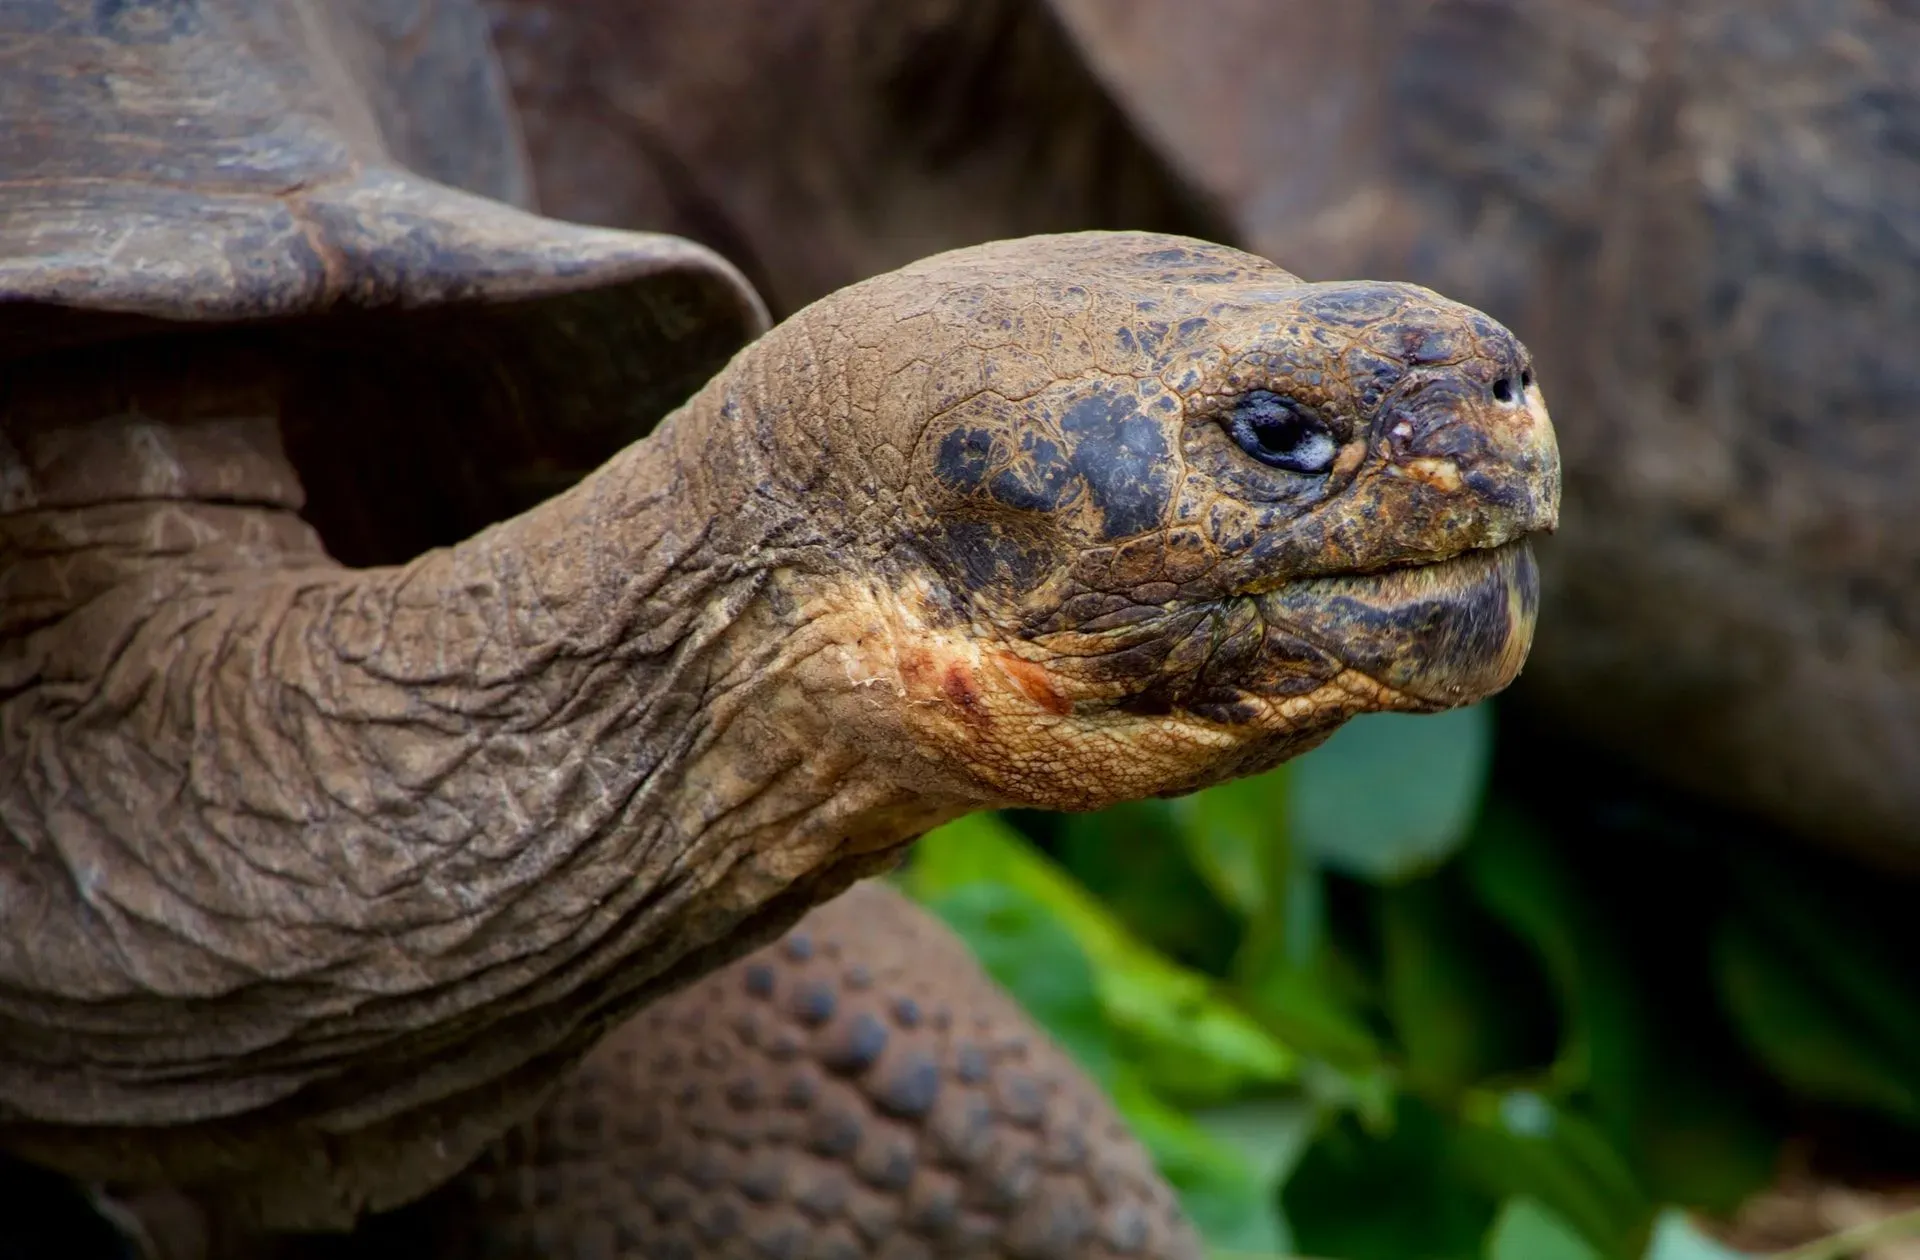 This tortoise species is native to Malaysia and other southeastern Asian countries.